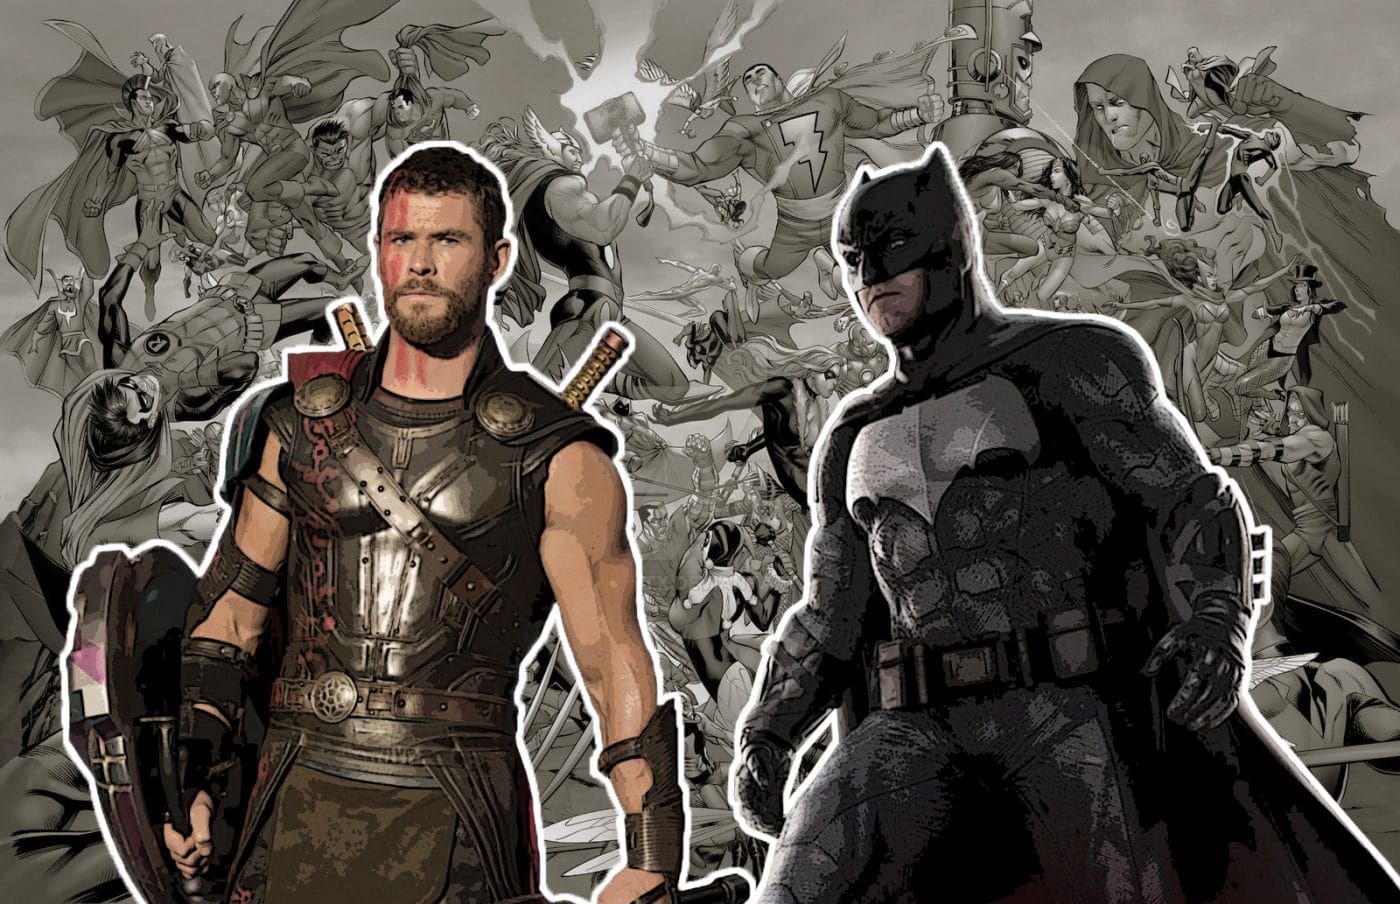 The Justice League has arrived but Thor still reigns supreme | LIVING LIFE FEARLESS